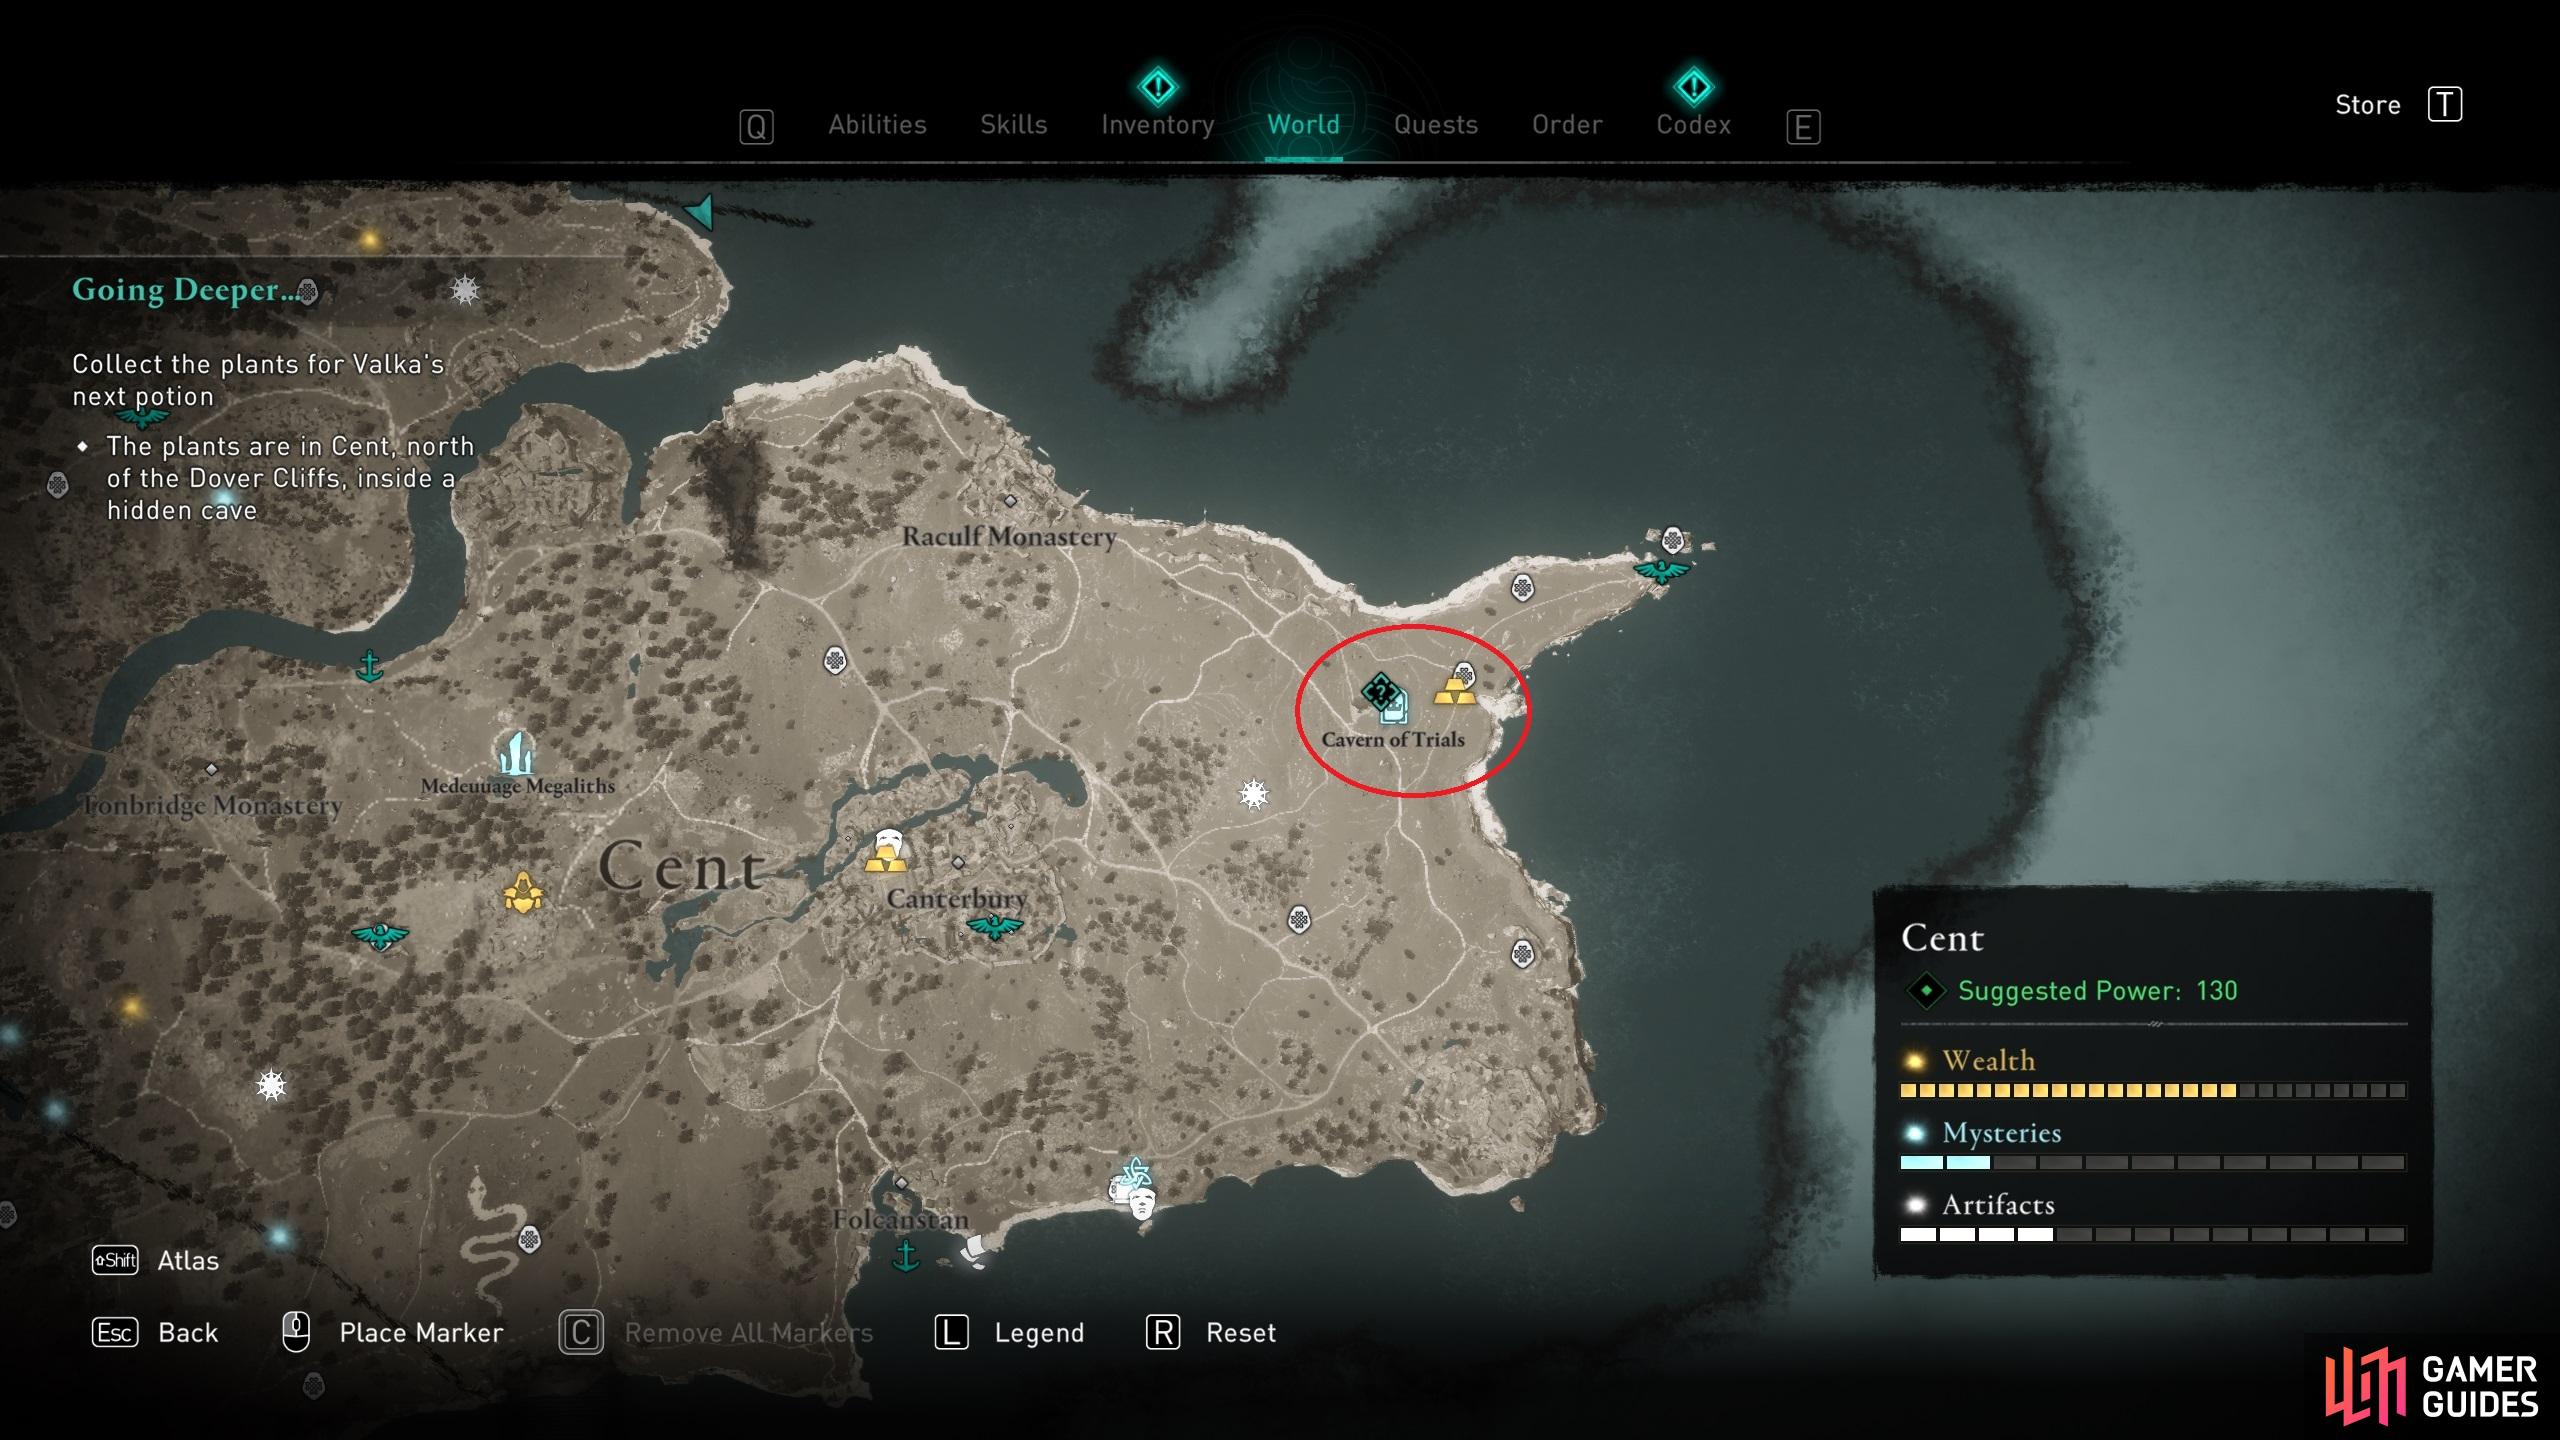 You'll find the Cavern of Trials near the eastern coast in the region of Cent.